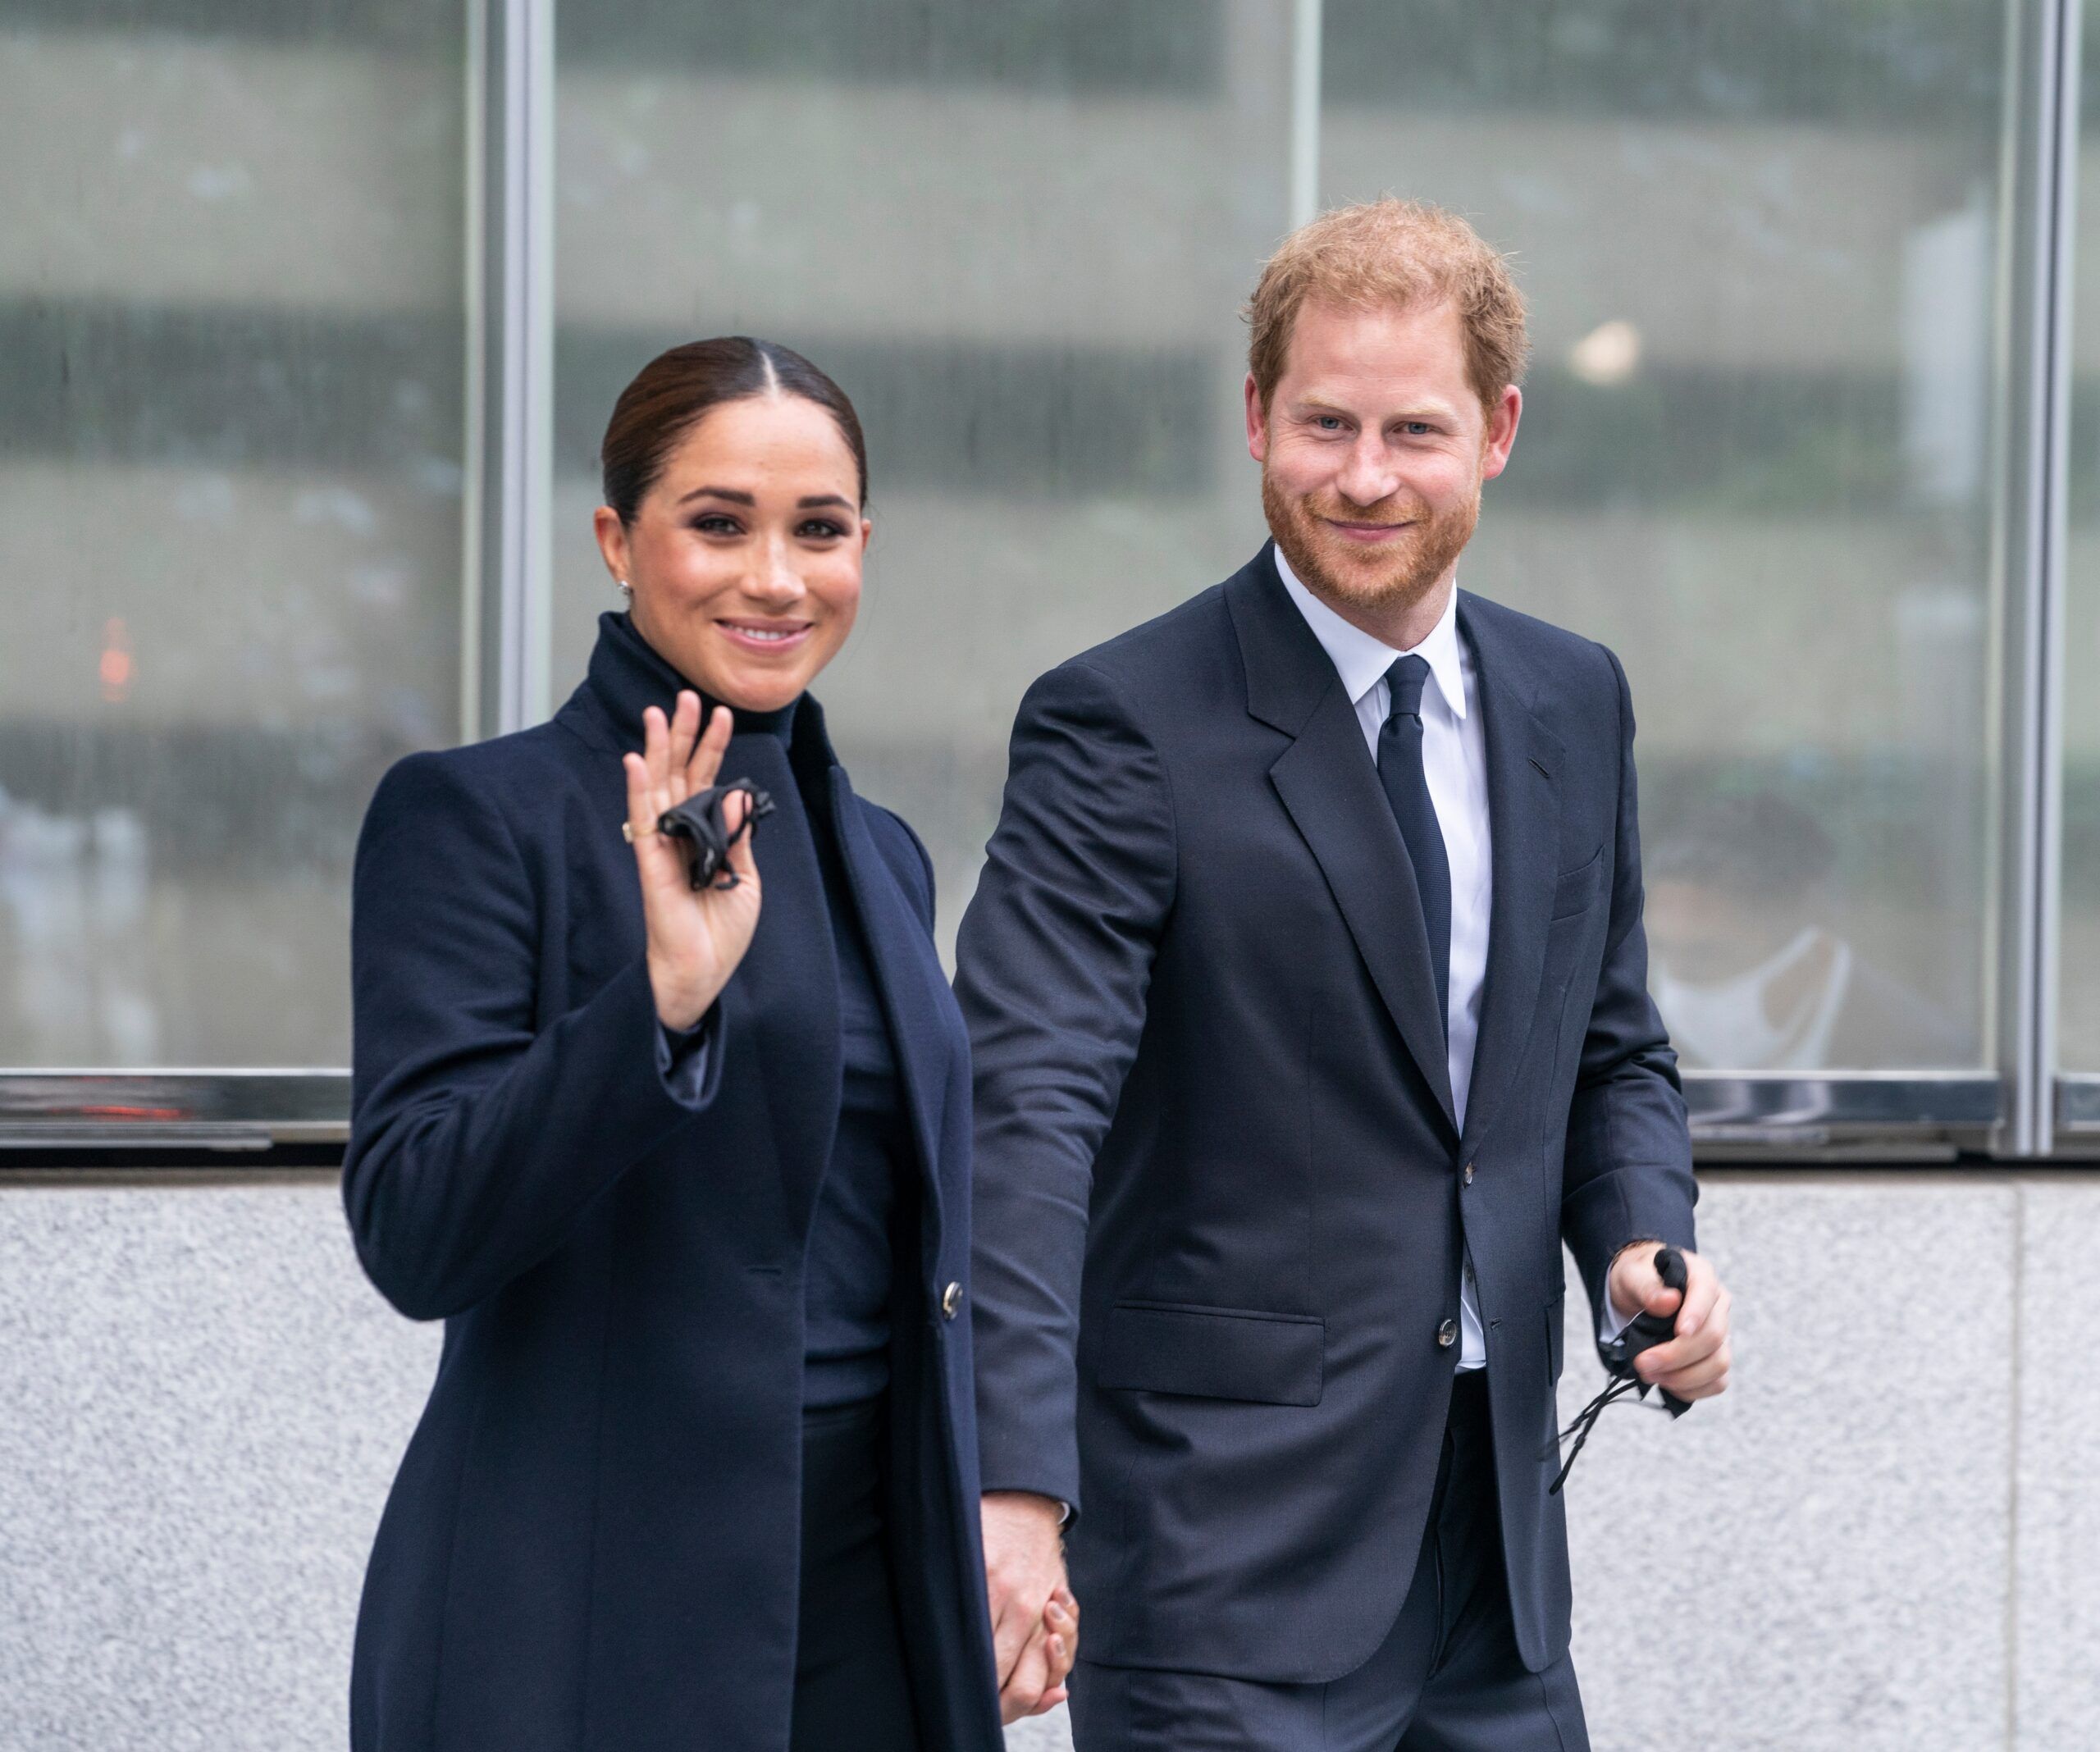 The Duke and Duchess of Sussex, Prince Harry and Meghan visit One World Observatory on 102nd floor of Freedom Tower ofWorld Trade Center in 2021. Credit: Shutterstock.com/ Lev Radin.